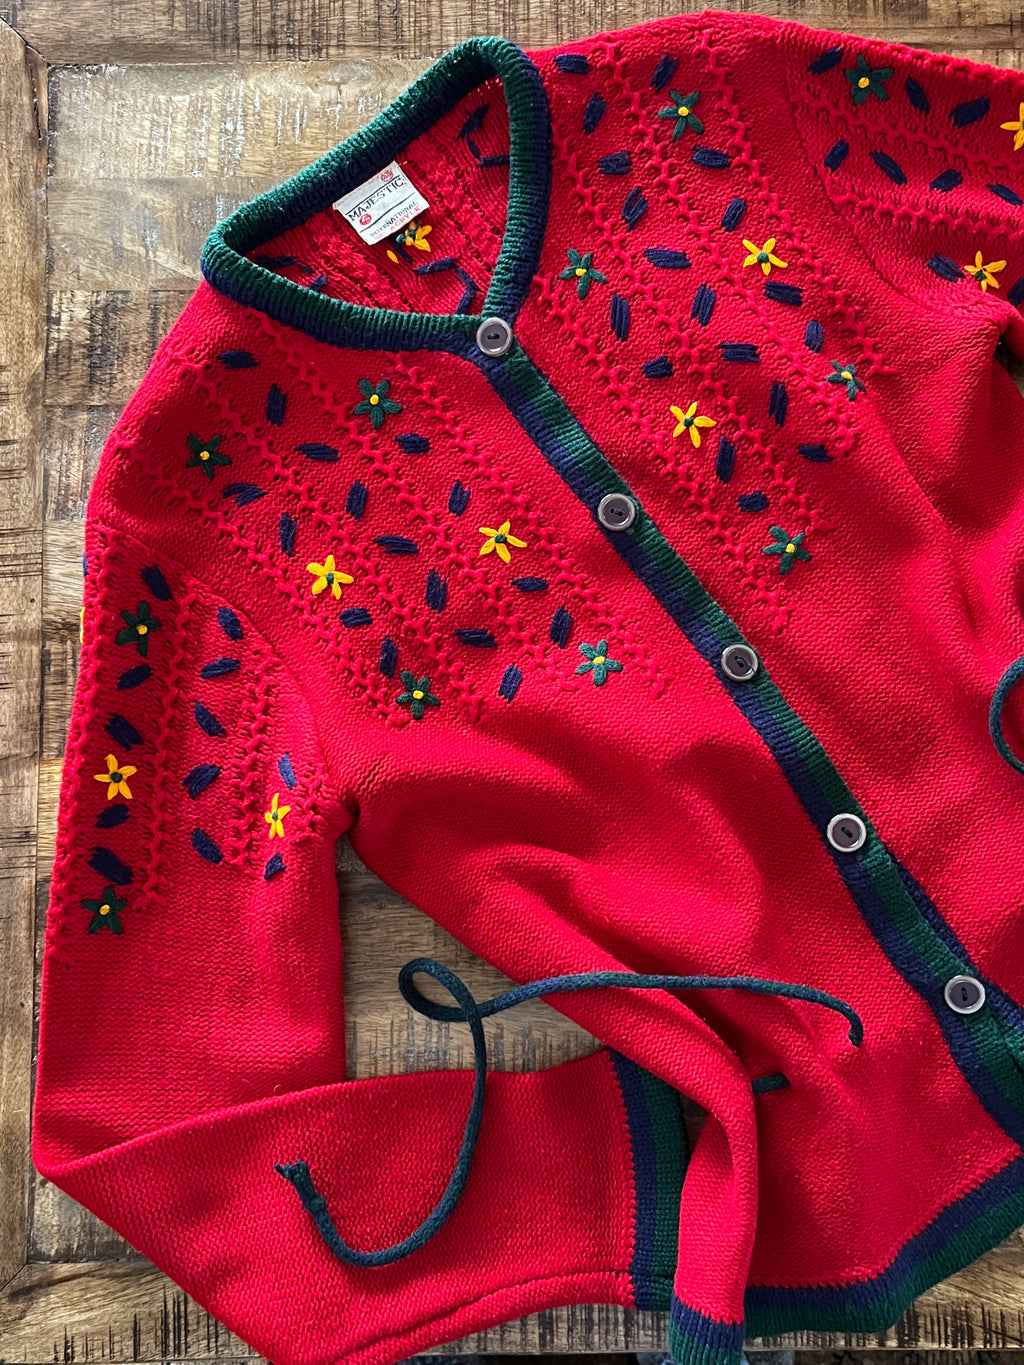 Vintage 1970s 1980s German/Austrian Sweater - Zesty Red Embroidered Dirndl Folkloric Austrian Tyrolean Cardigan Size XS S